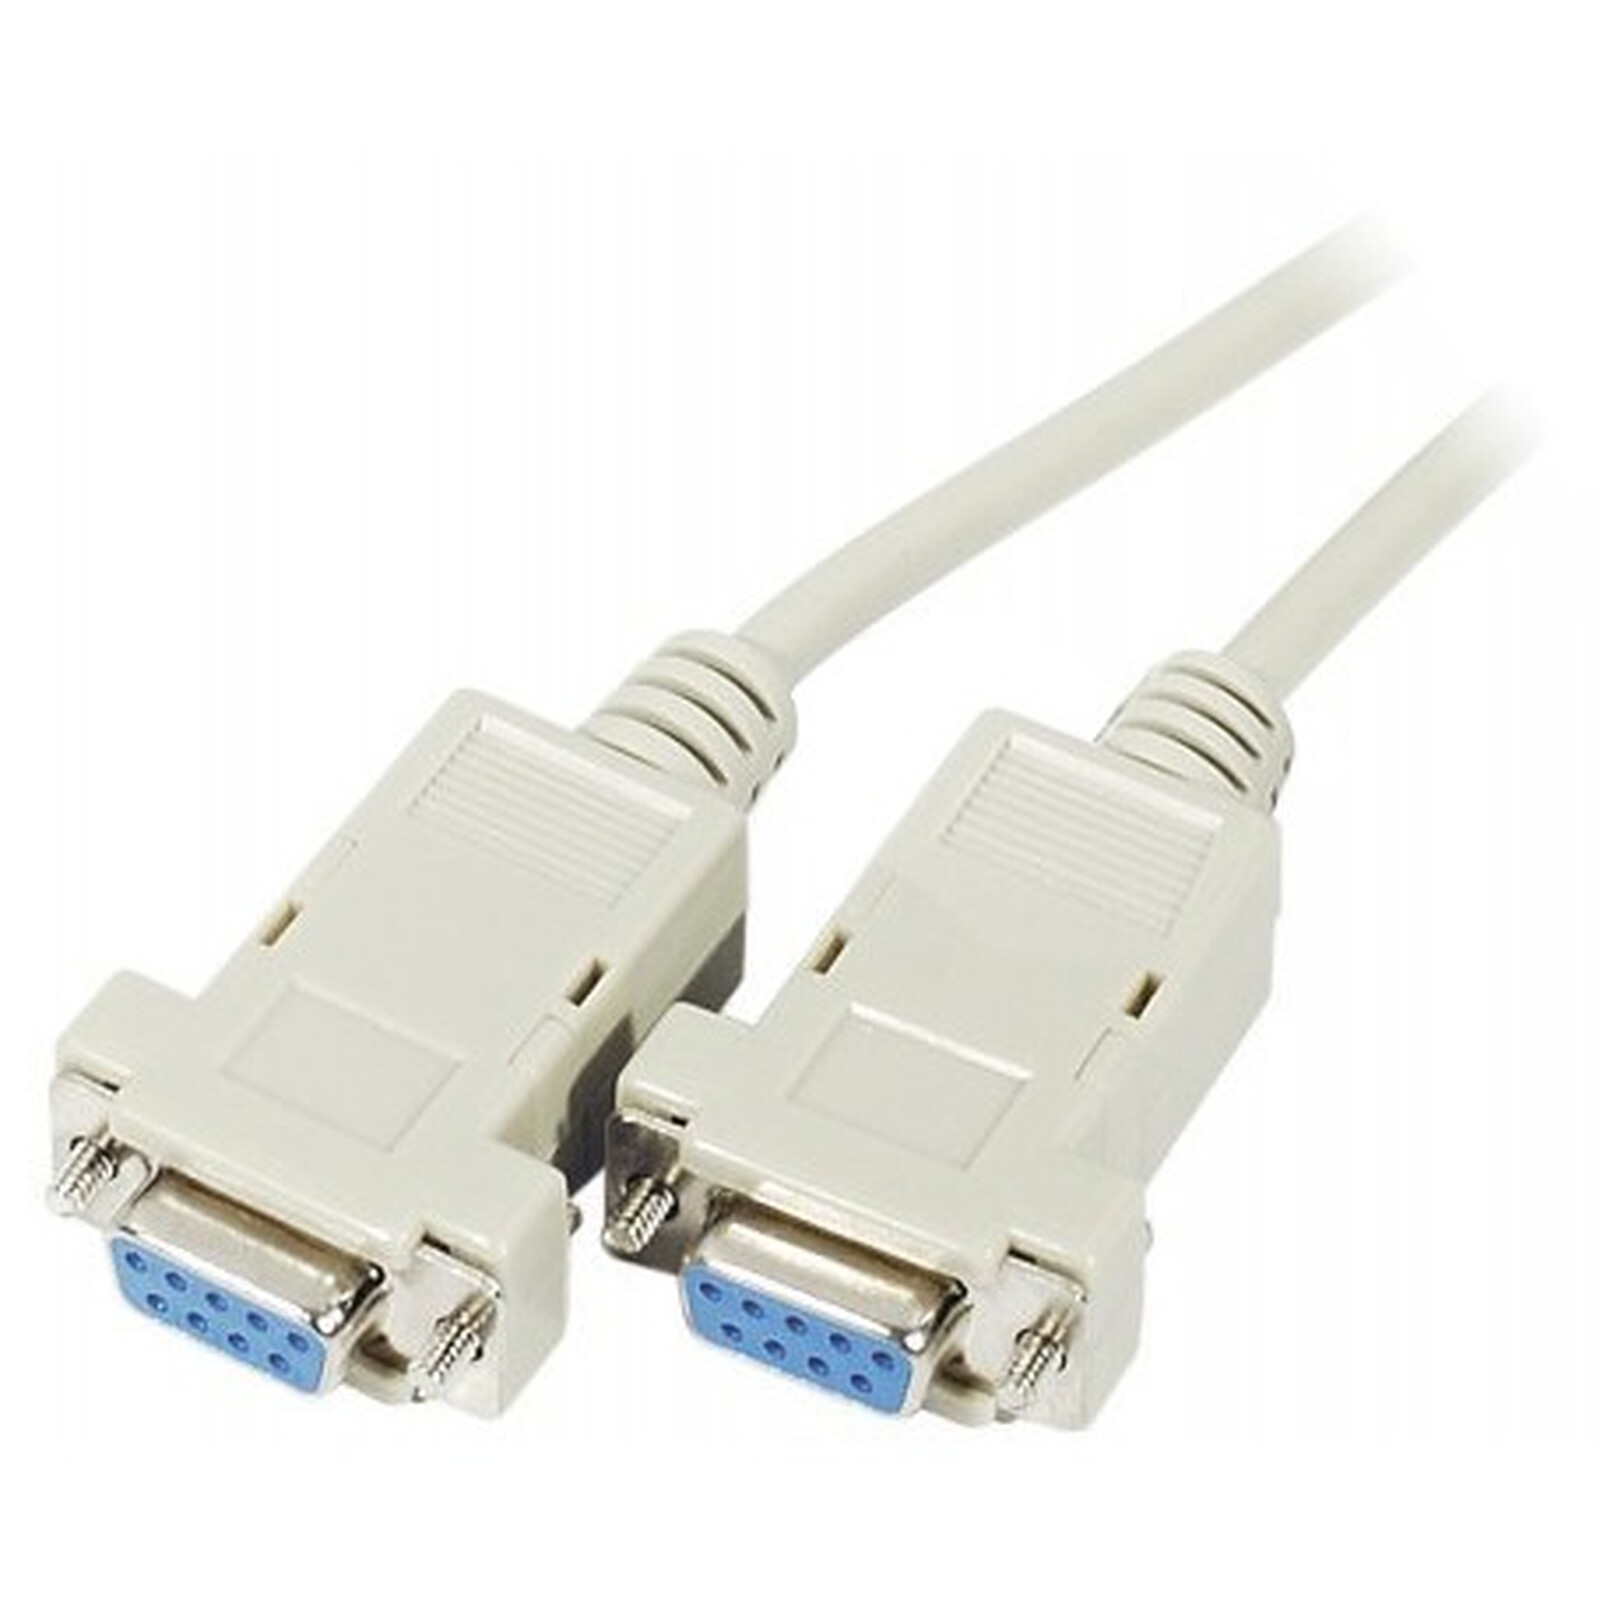 balcony Acquisition Arrow Cable DB9 Null Modem female / female (3 meters) - Serial Generic on LDLC